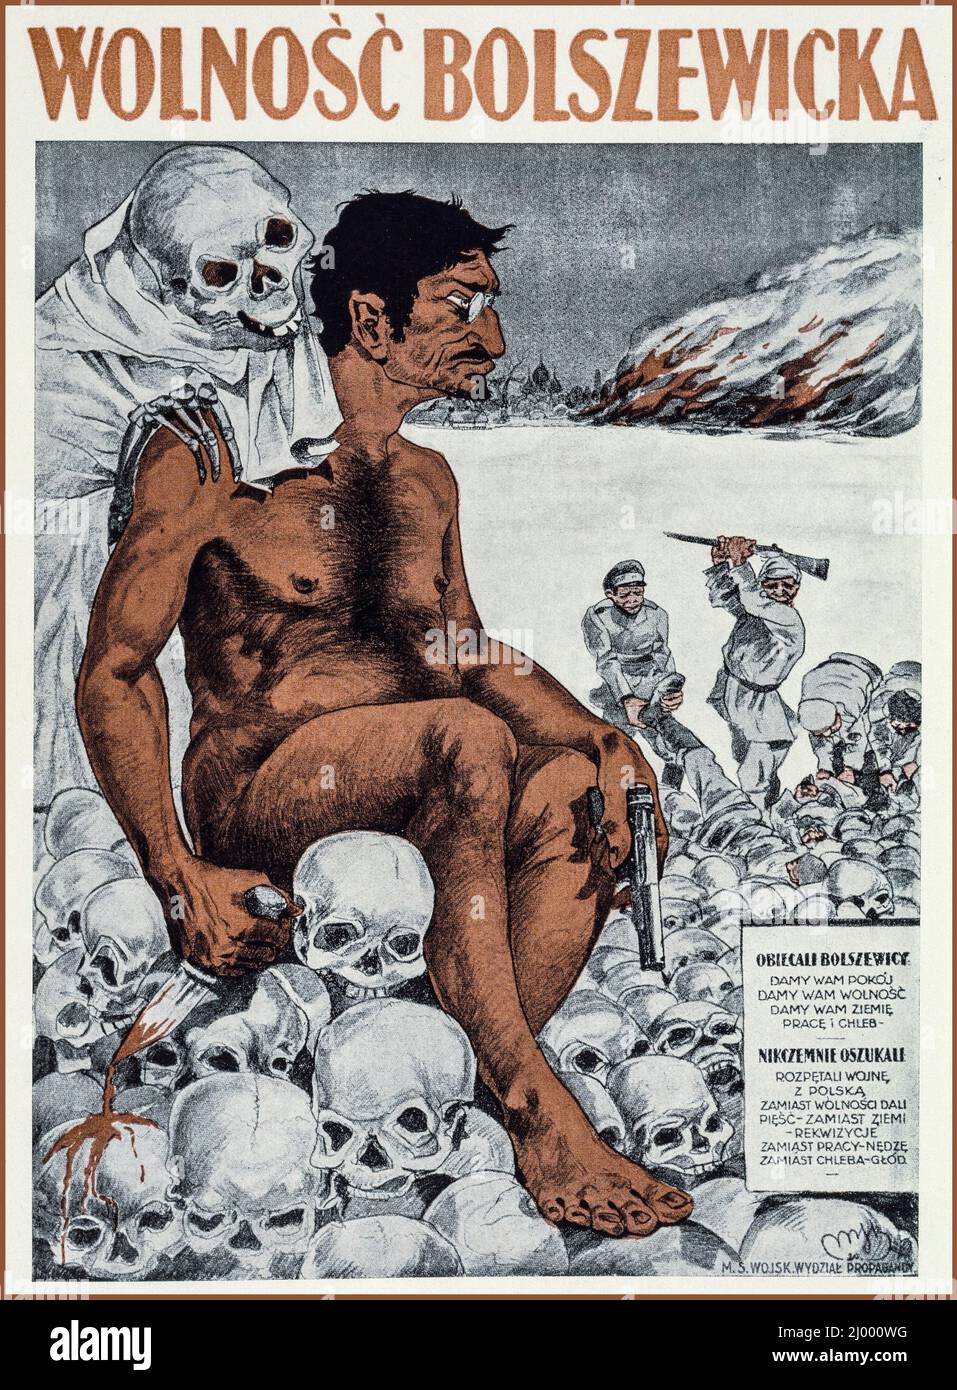 Vintage Propaganda Poster 1920 Trotsky depicted by Polish propaganda (1920) as a blood-soaked Bolshevik during the Polish-Russian war of 1920. Polish government anti-communist poster to counter Bolshevik propaganda from Russia during the Polish- Russian war 1920 Stock Photo